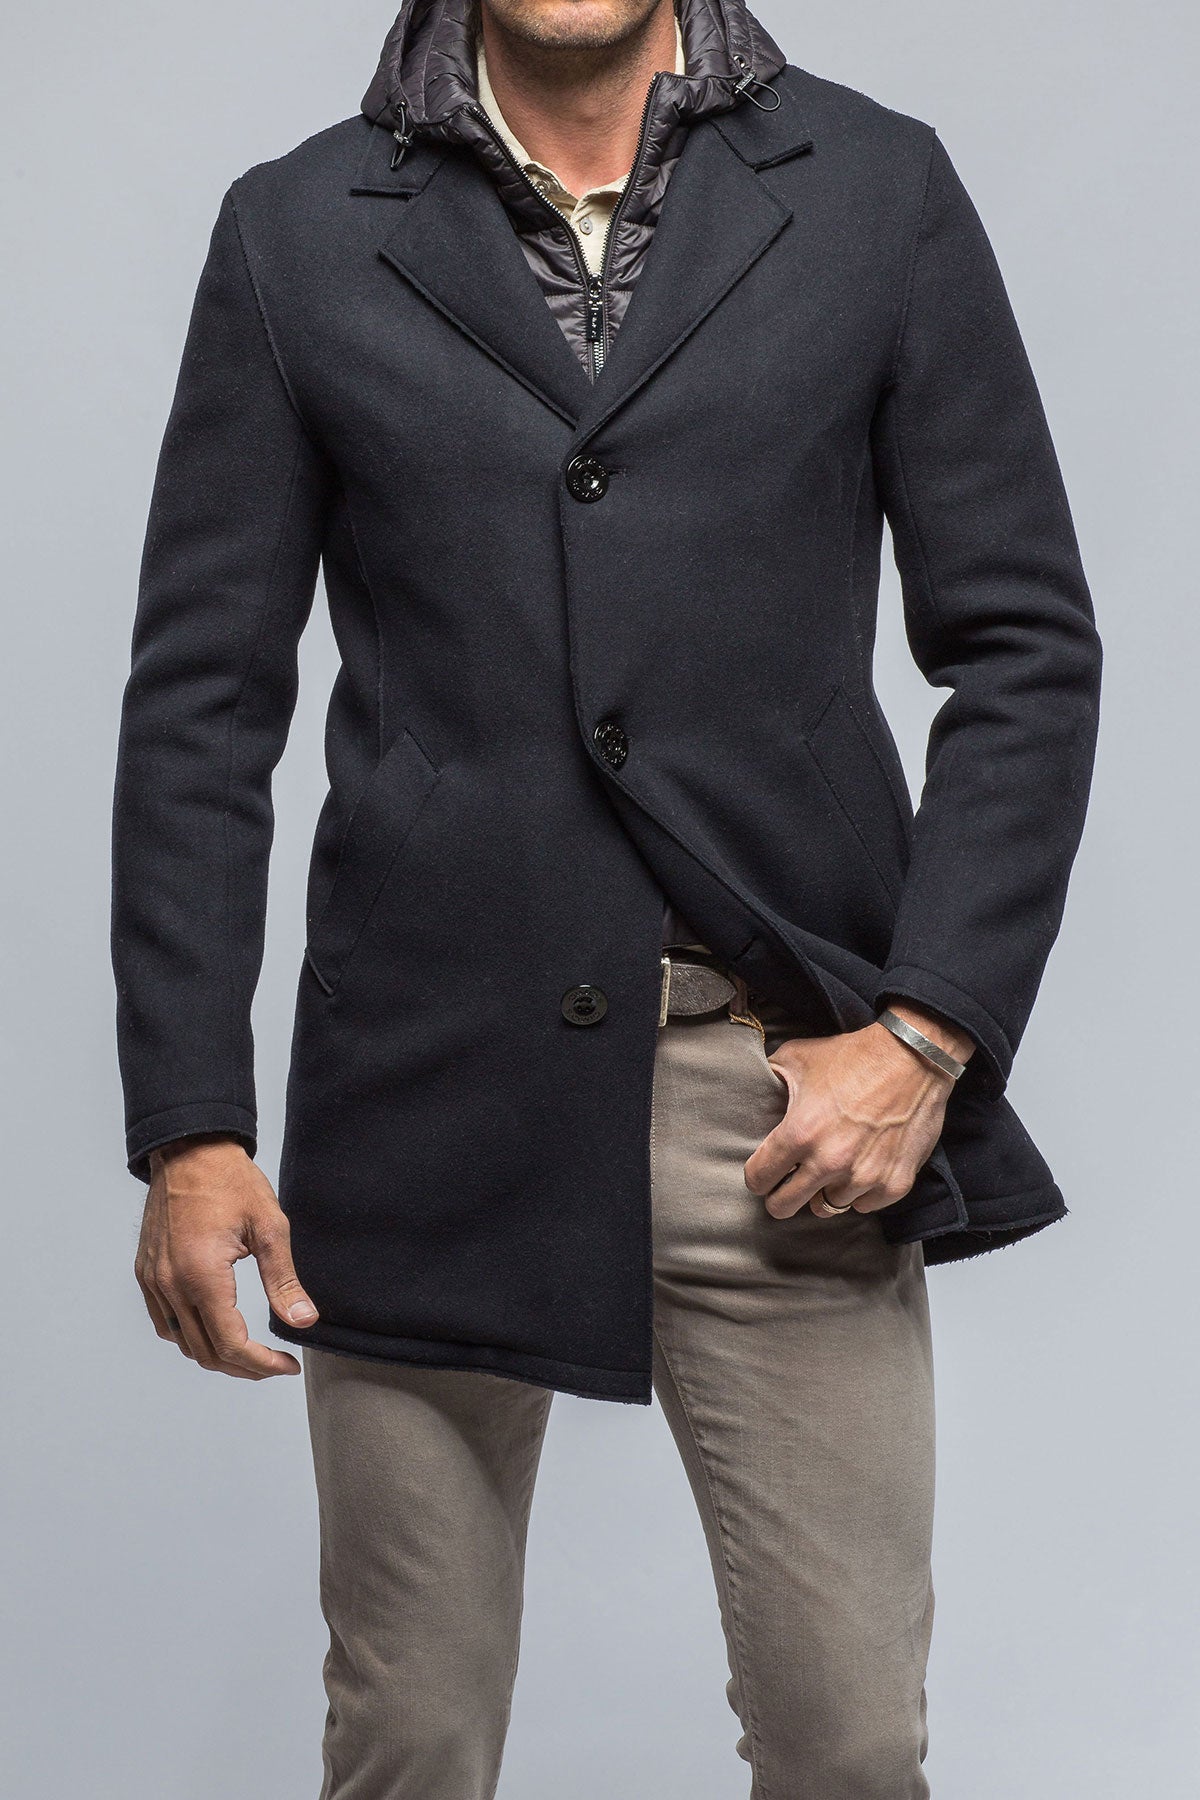 Weatherford Wool Coat | Samples - Mens - Outerwear - Leather | Gimo's